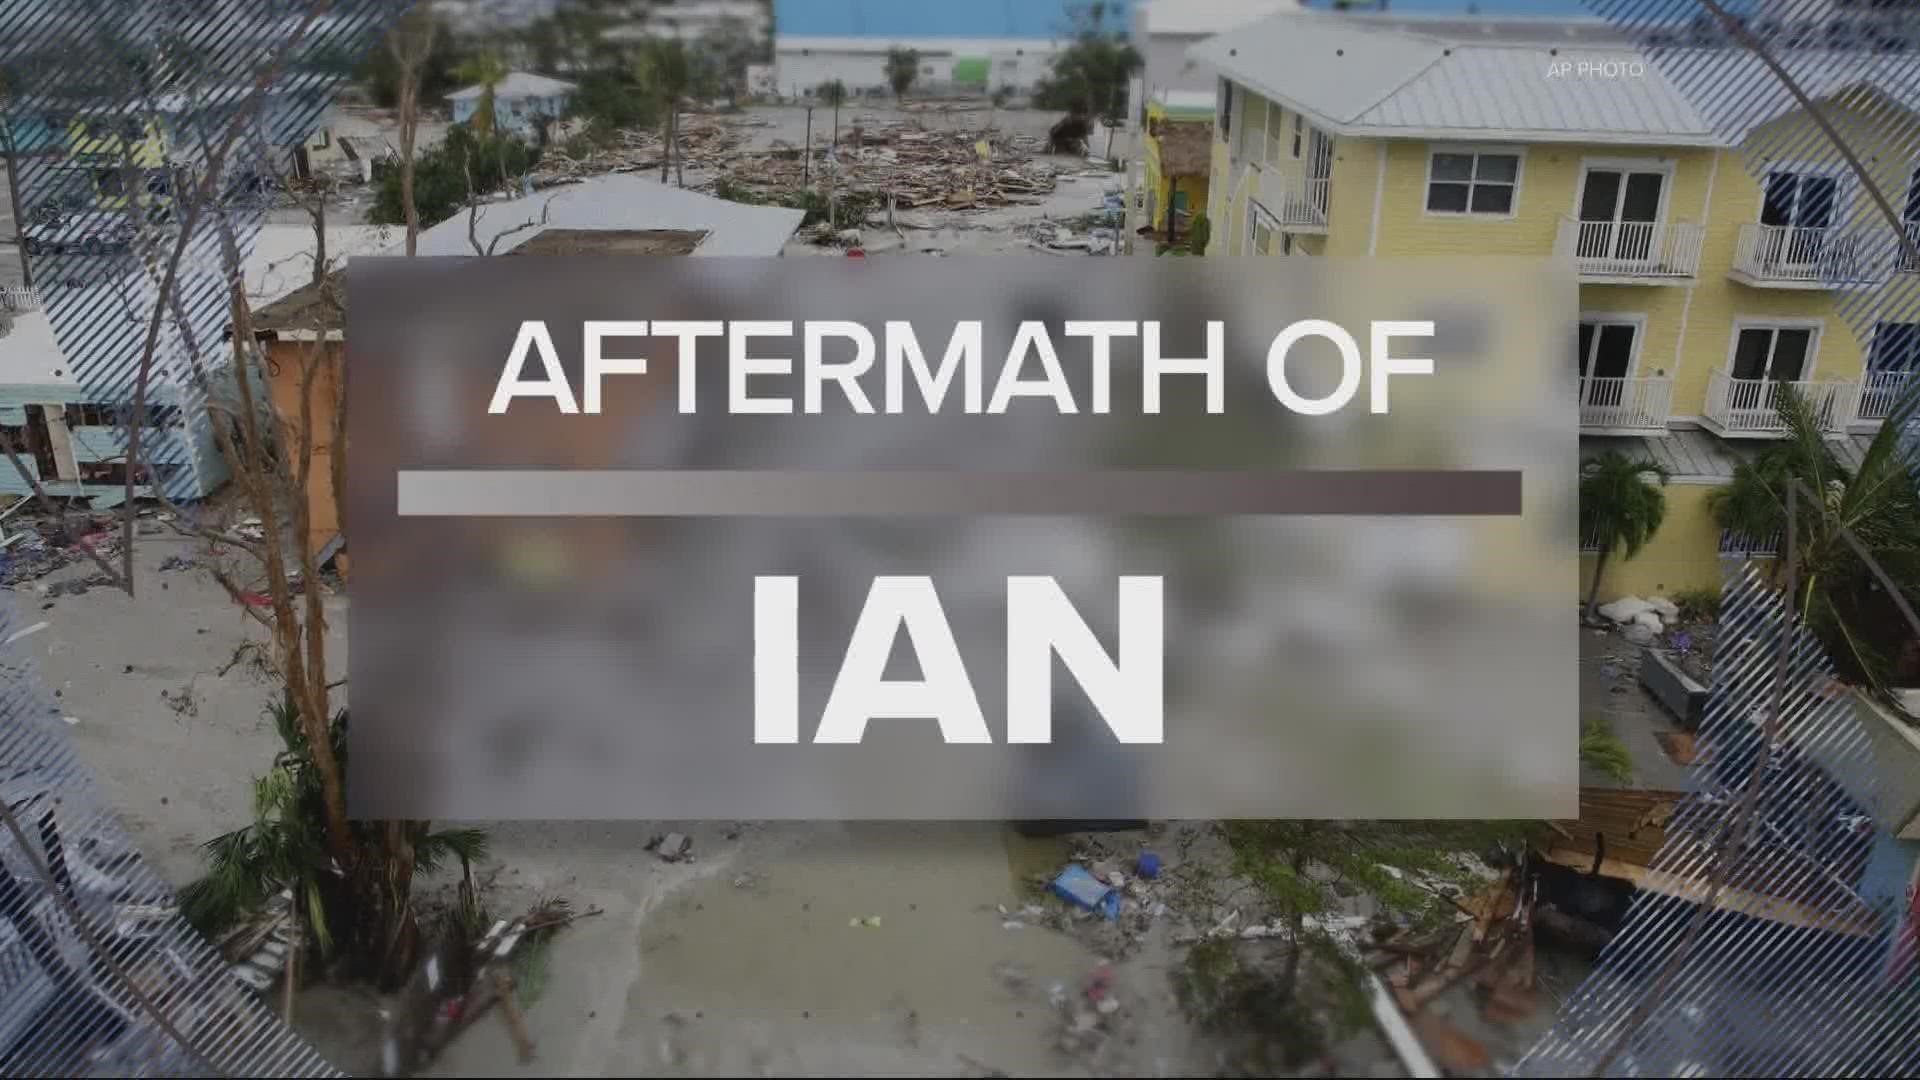 The death toll continues to rise and more pictures and videos continue to be released of the devastation after Ian.